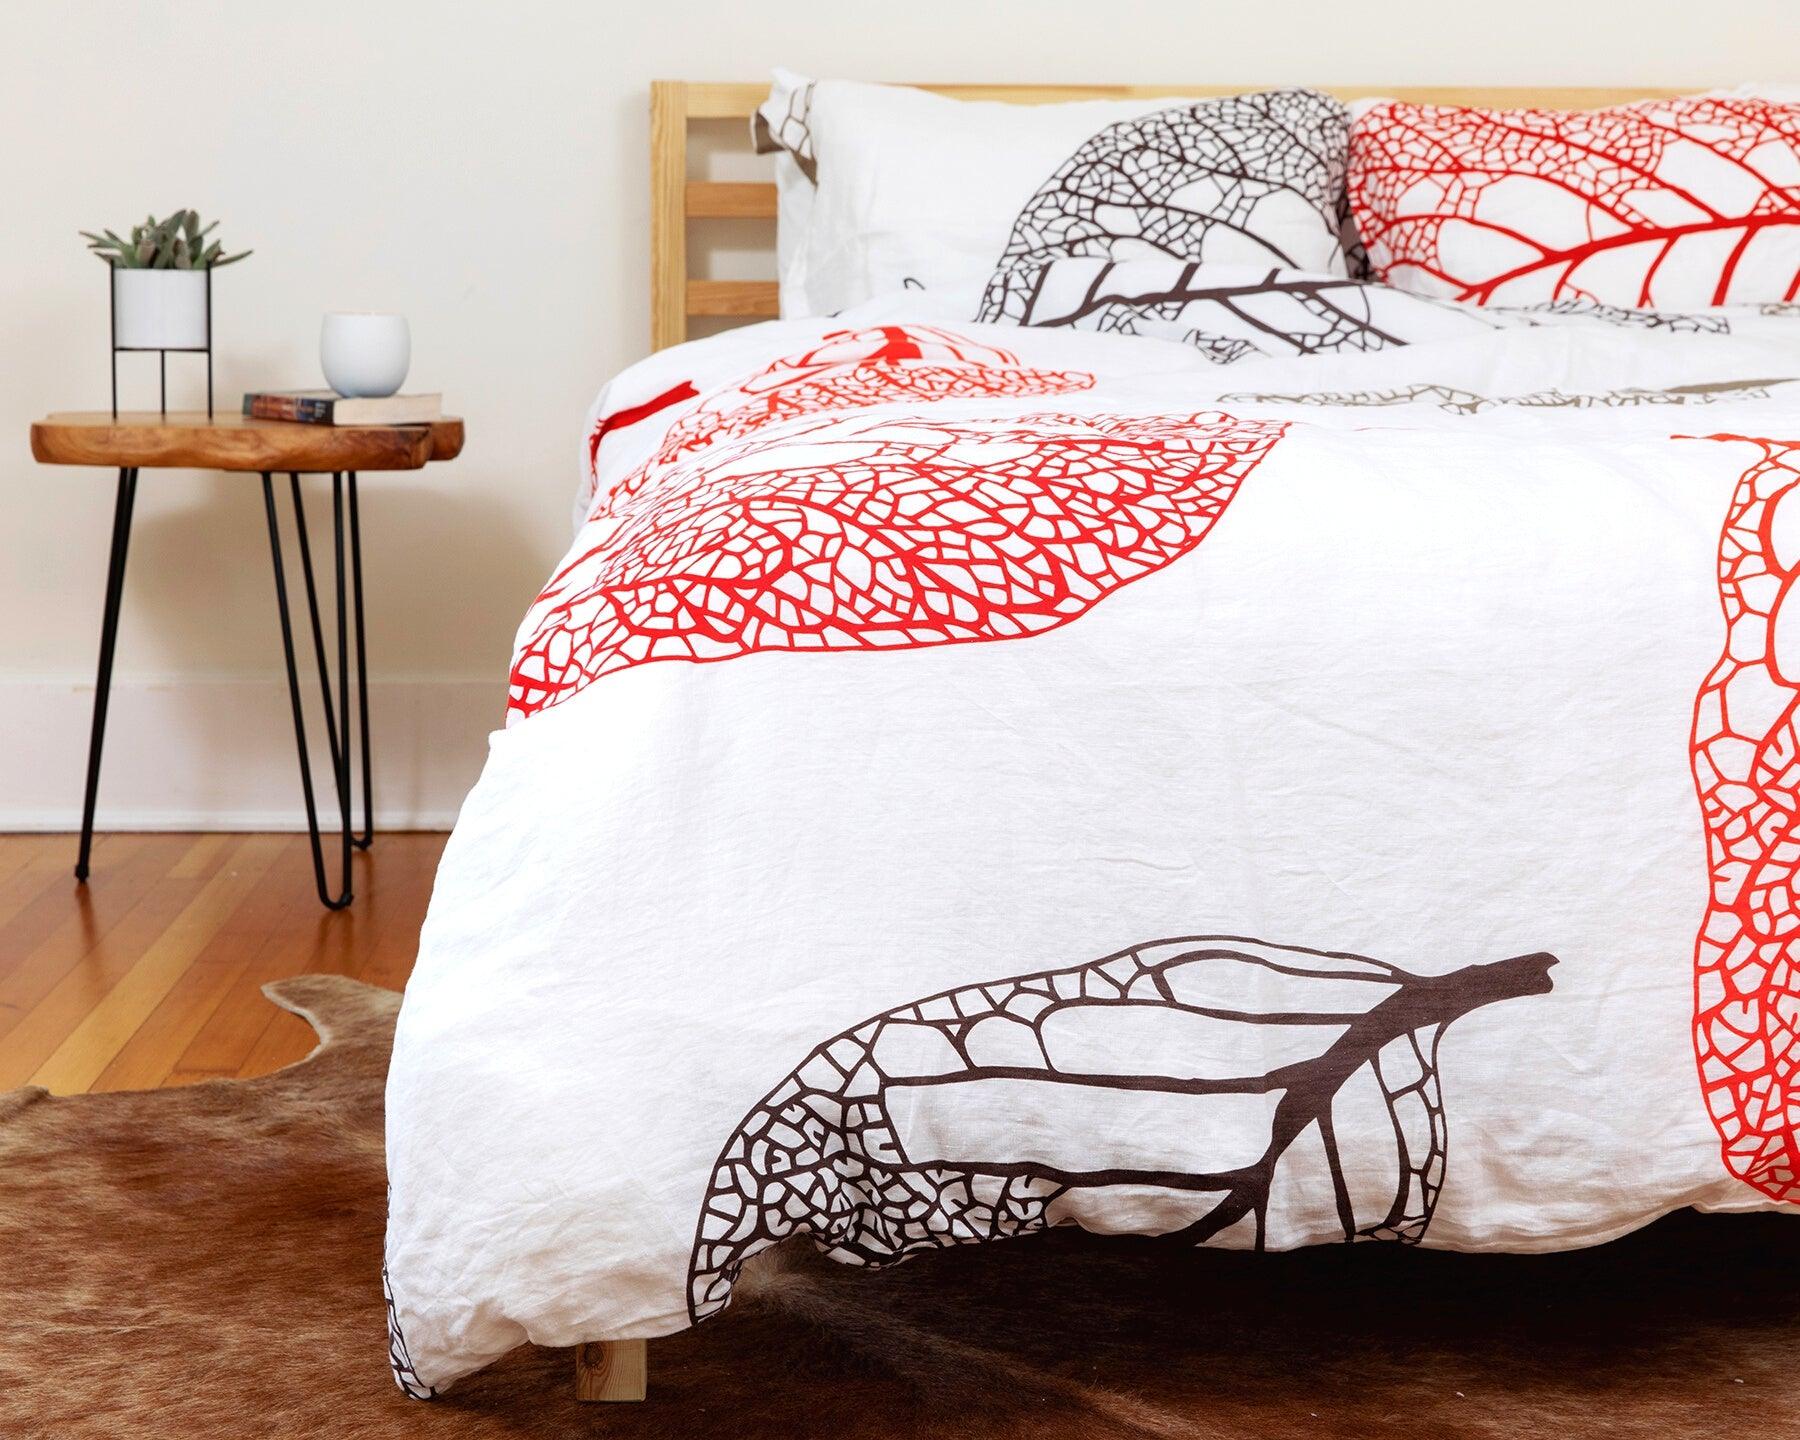 European organic linen duvet cover with two matching pillow cases fall leaves design